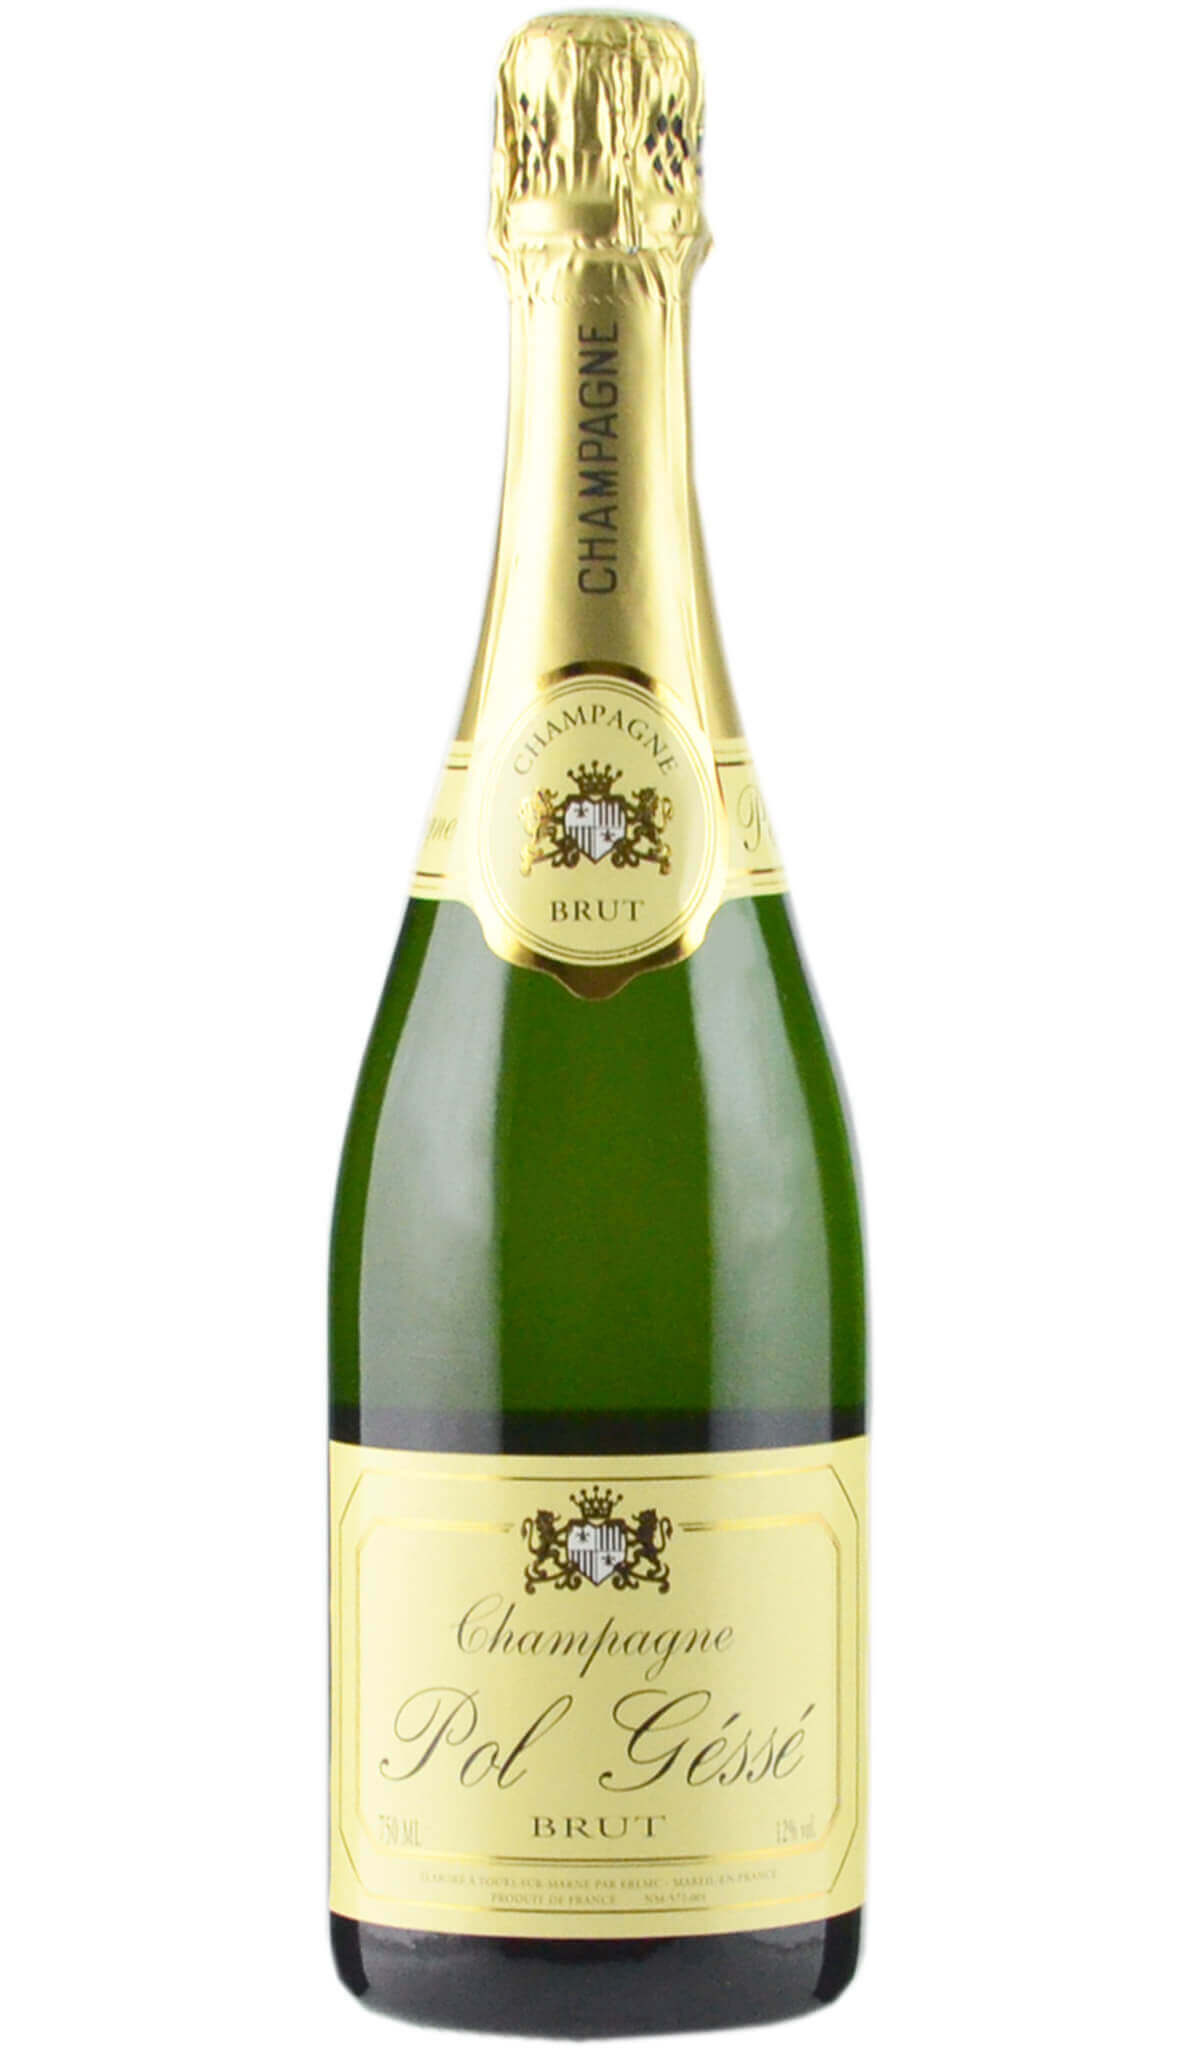 Find out more or buy Pol Géssé Champagne Brut NV 750mL online at Wine Sellers Direct - Australia’s independent liquor specialists.